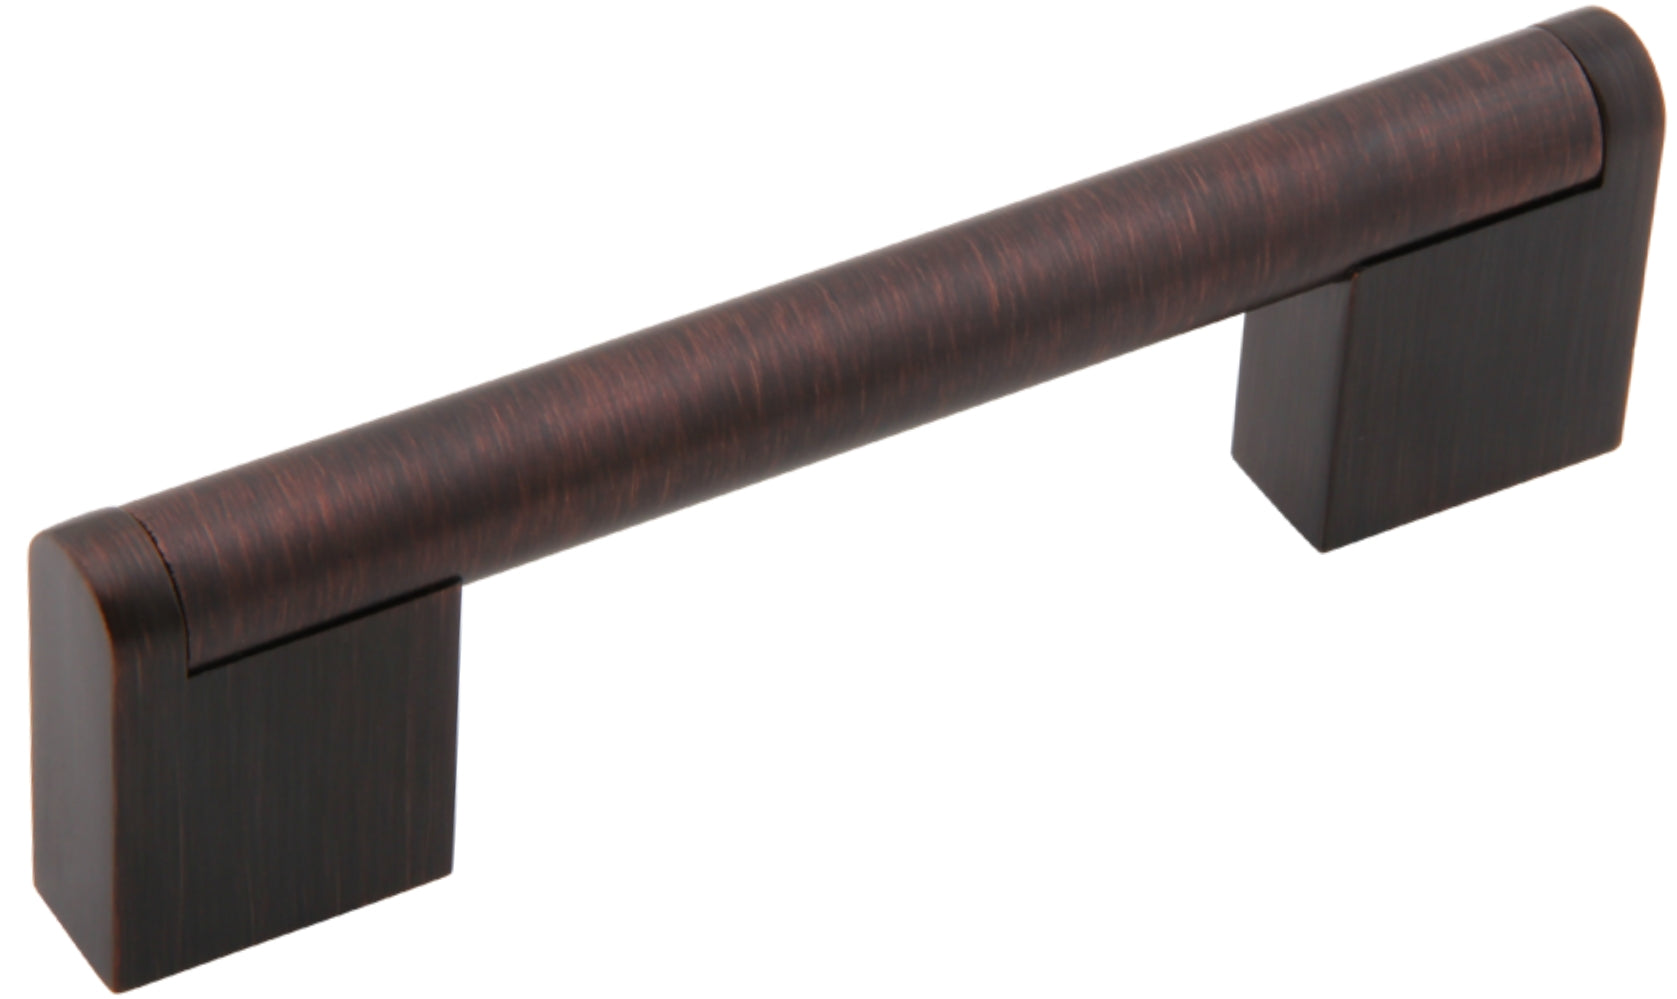 Silverline P2033 - Round Modern Cross Bar Pull Hammer Pull Cabinet Pull Handle Various Sizes and Finishes